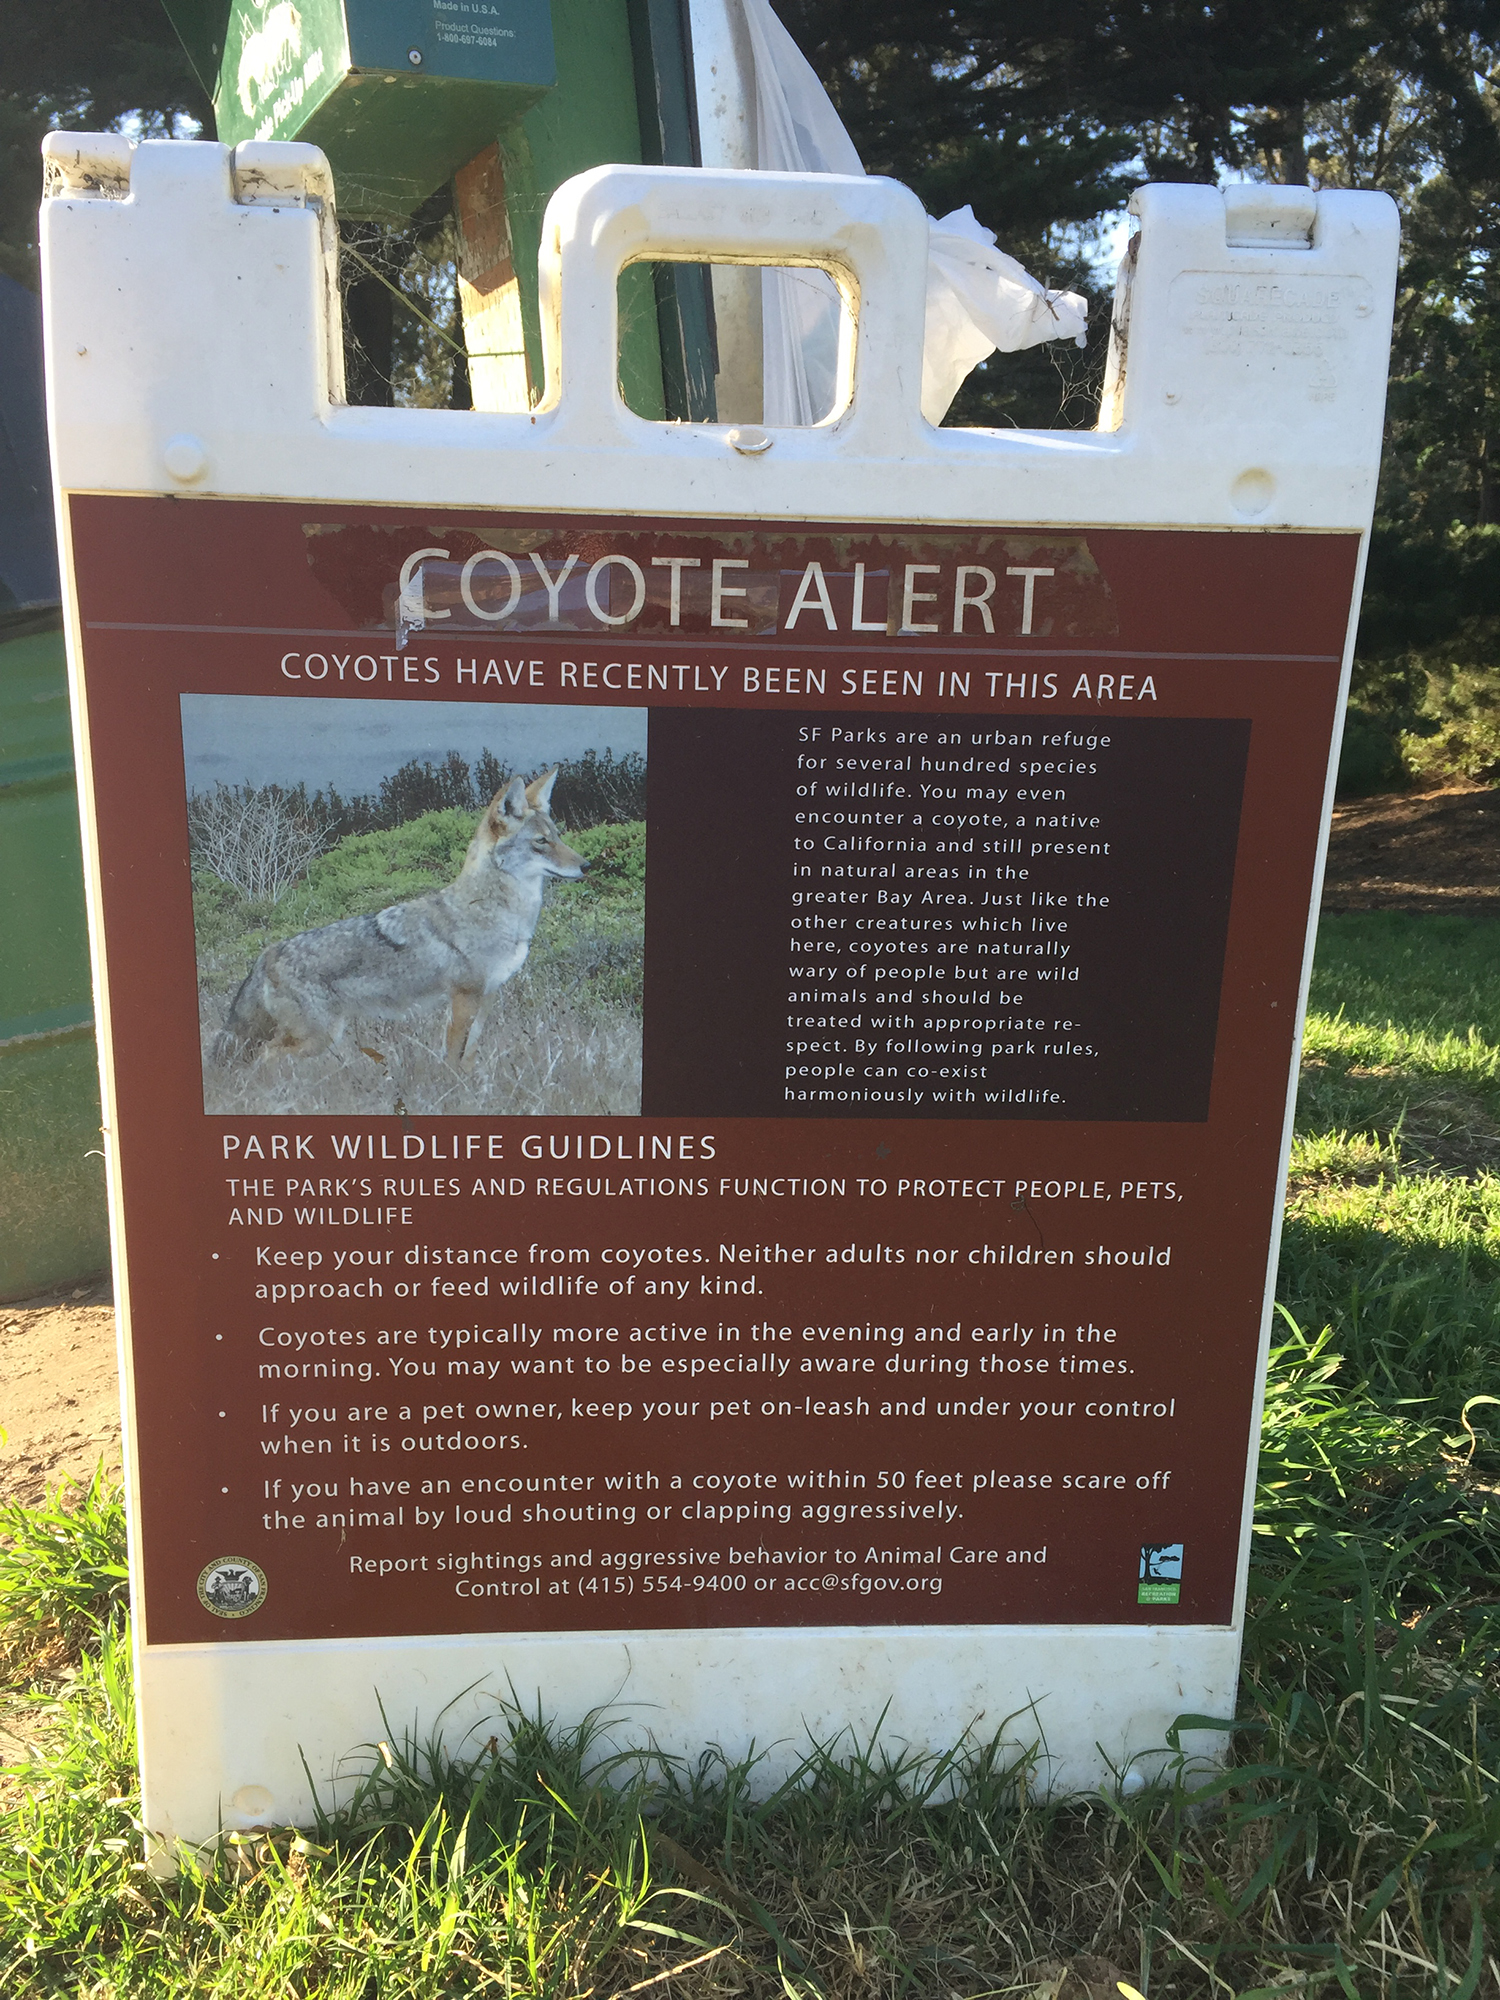 Signs like this are posted in a few spots in the Presidio and Mt Lake Park